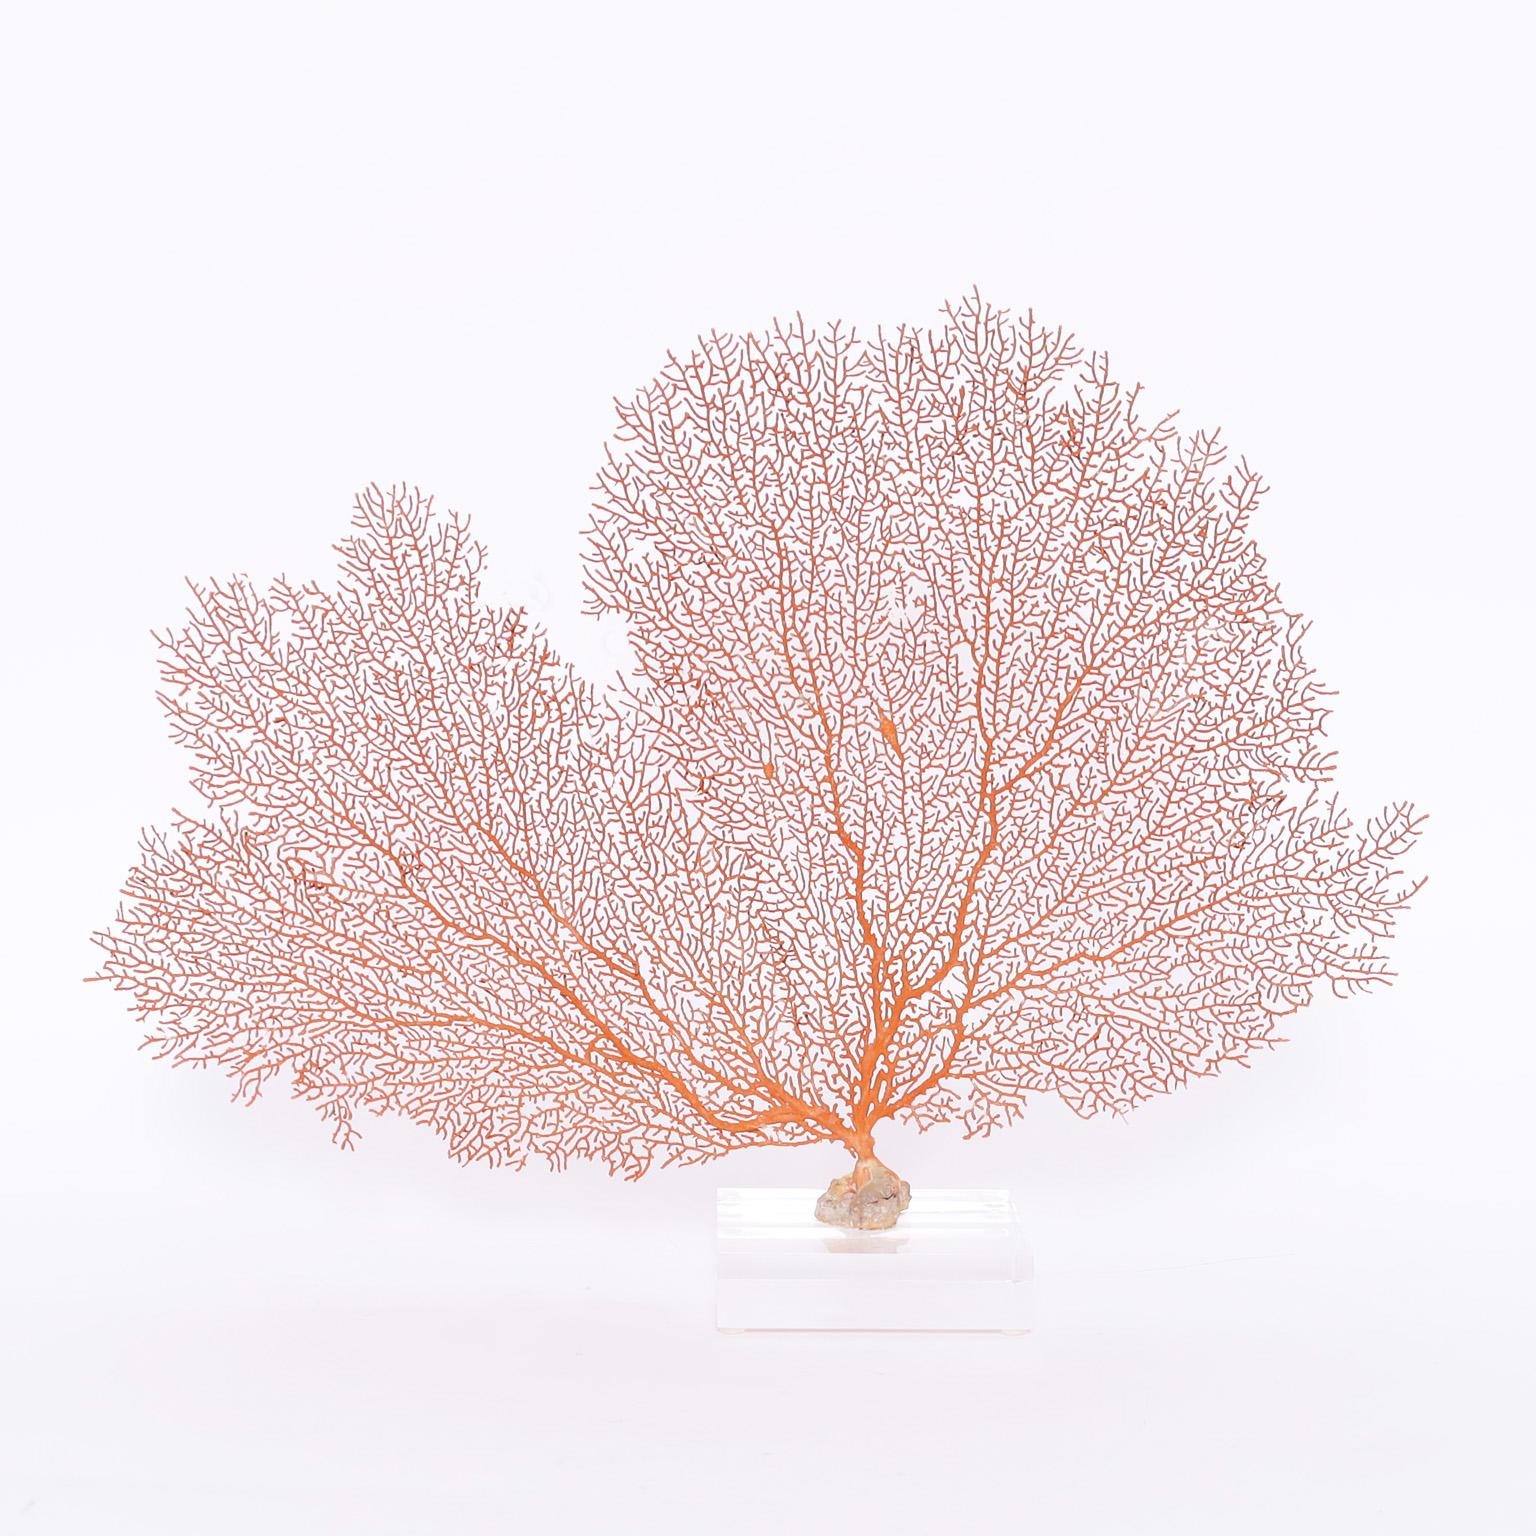 Here we present two red specimens with their familiar tree-like form and alluring color. Presented on lucite bases to enhance their sculptural elements.

Priced Individually.

Left: H: 13 W: 18 D: 4 $900

Right: H: 15 W: 16 D: 4 $1050.